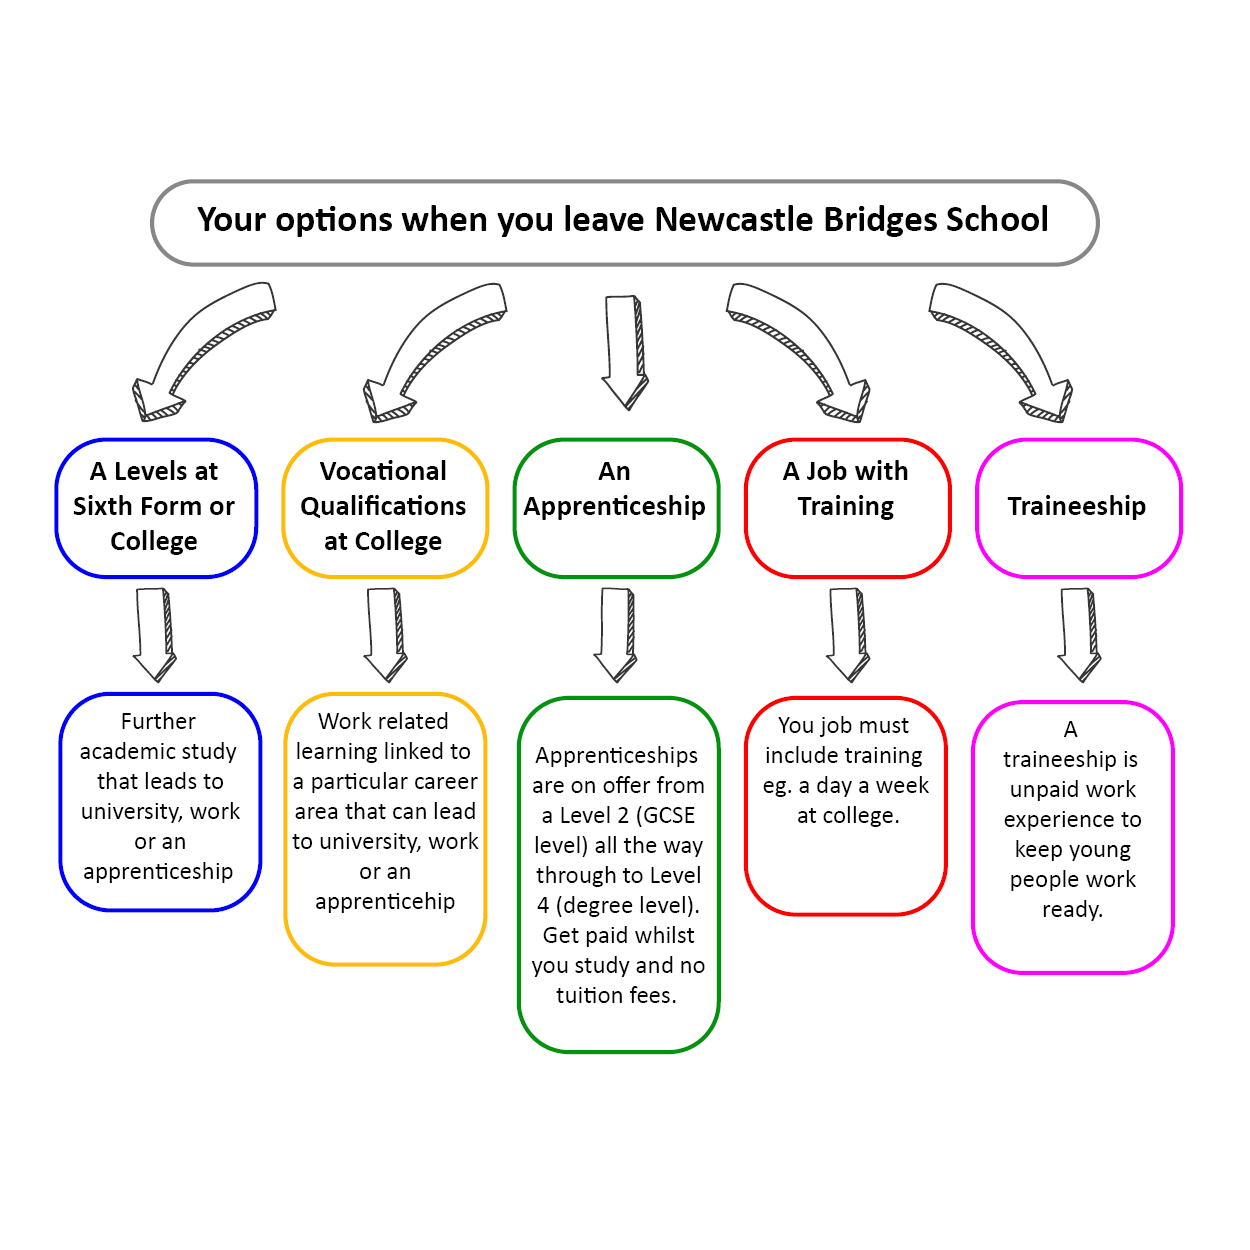 Your options after school